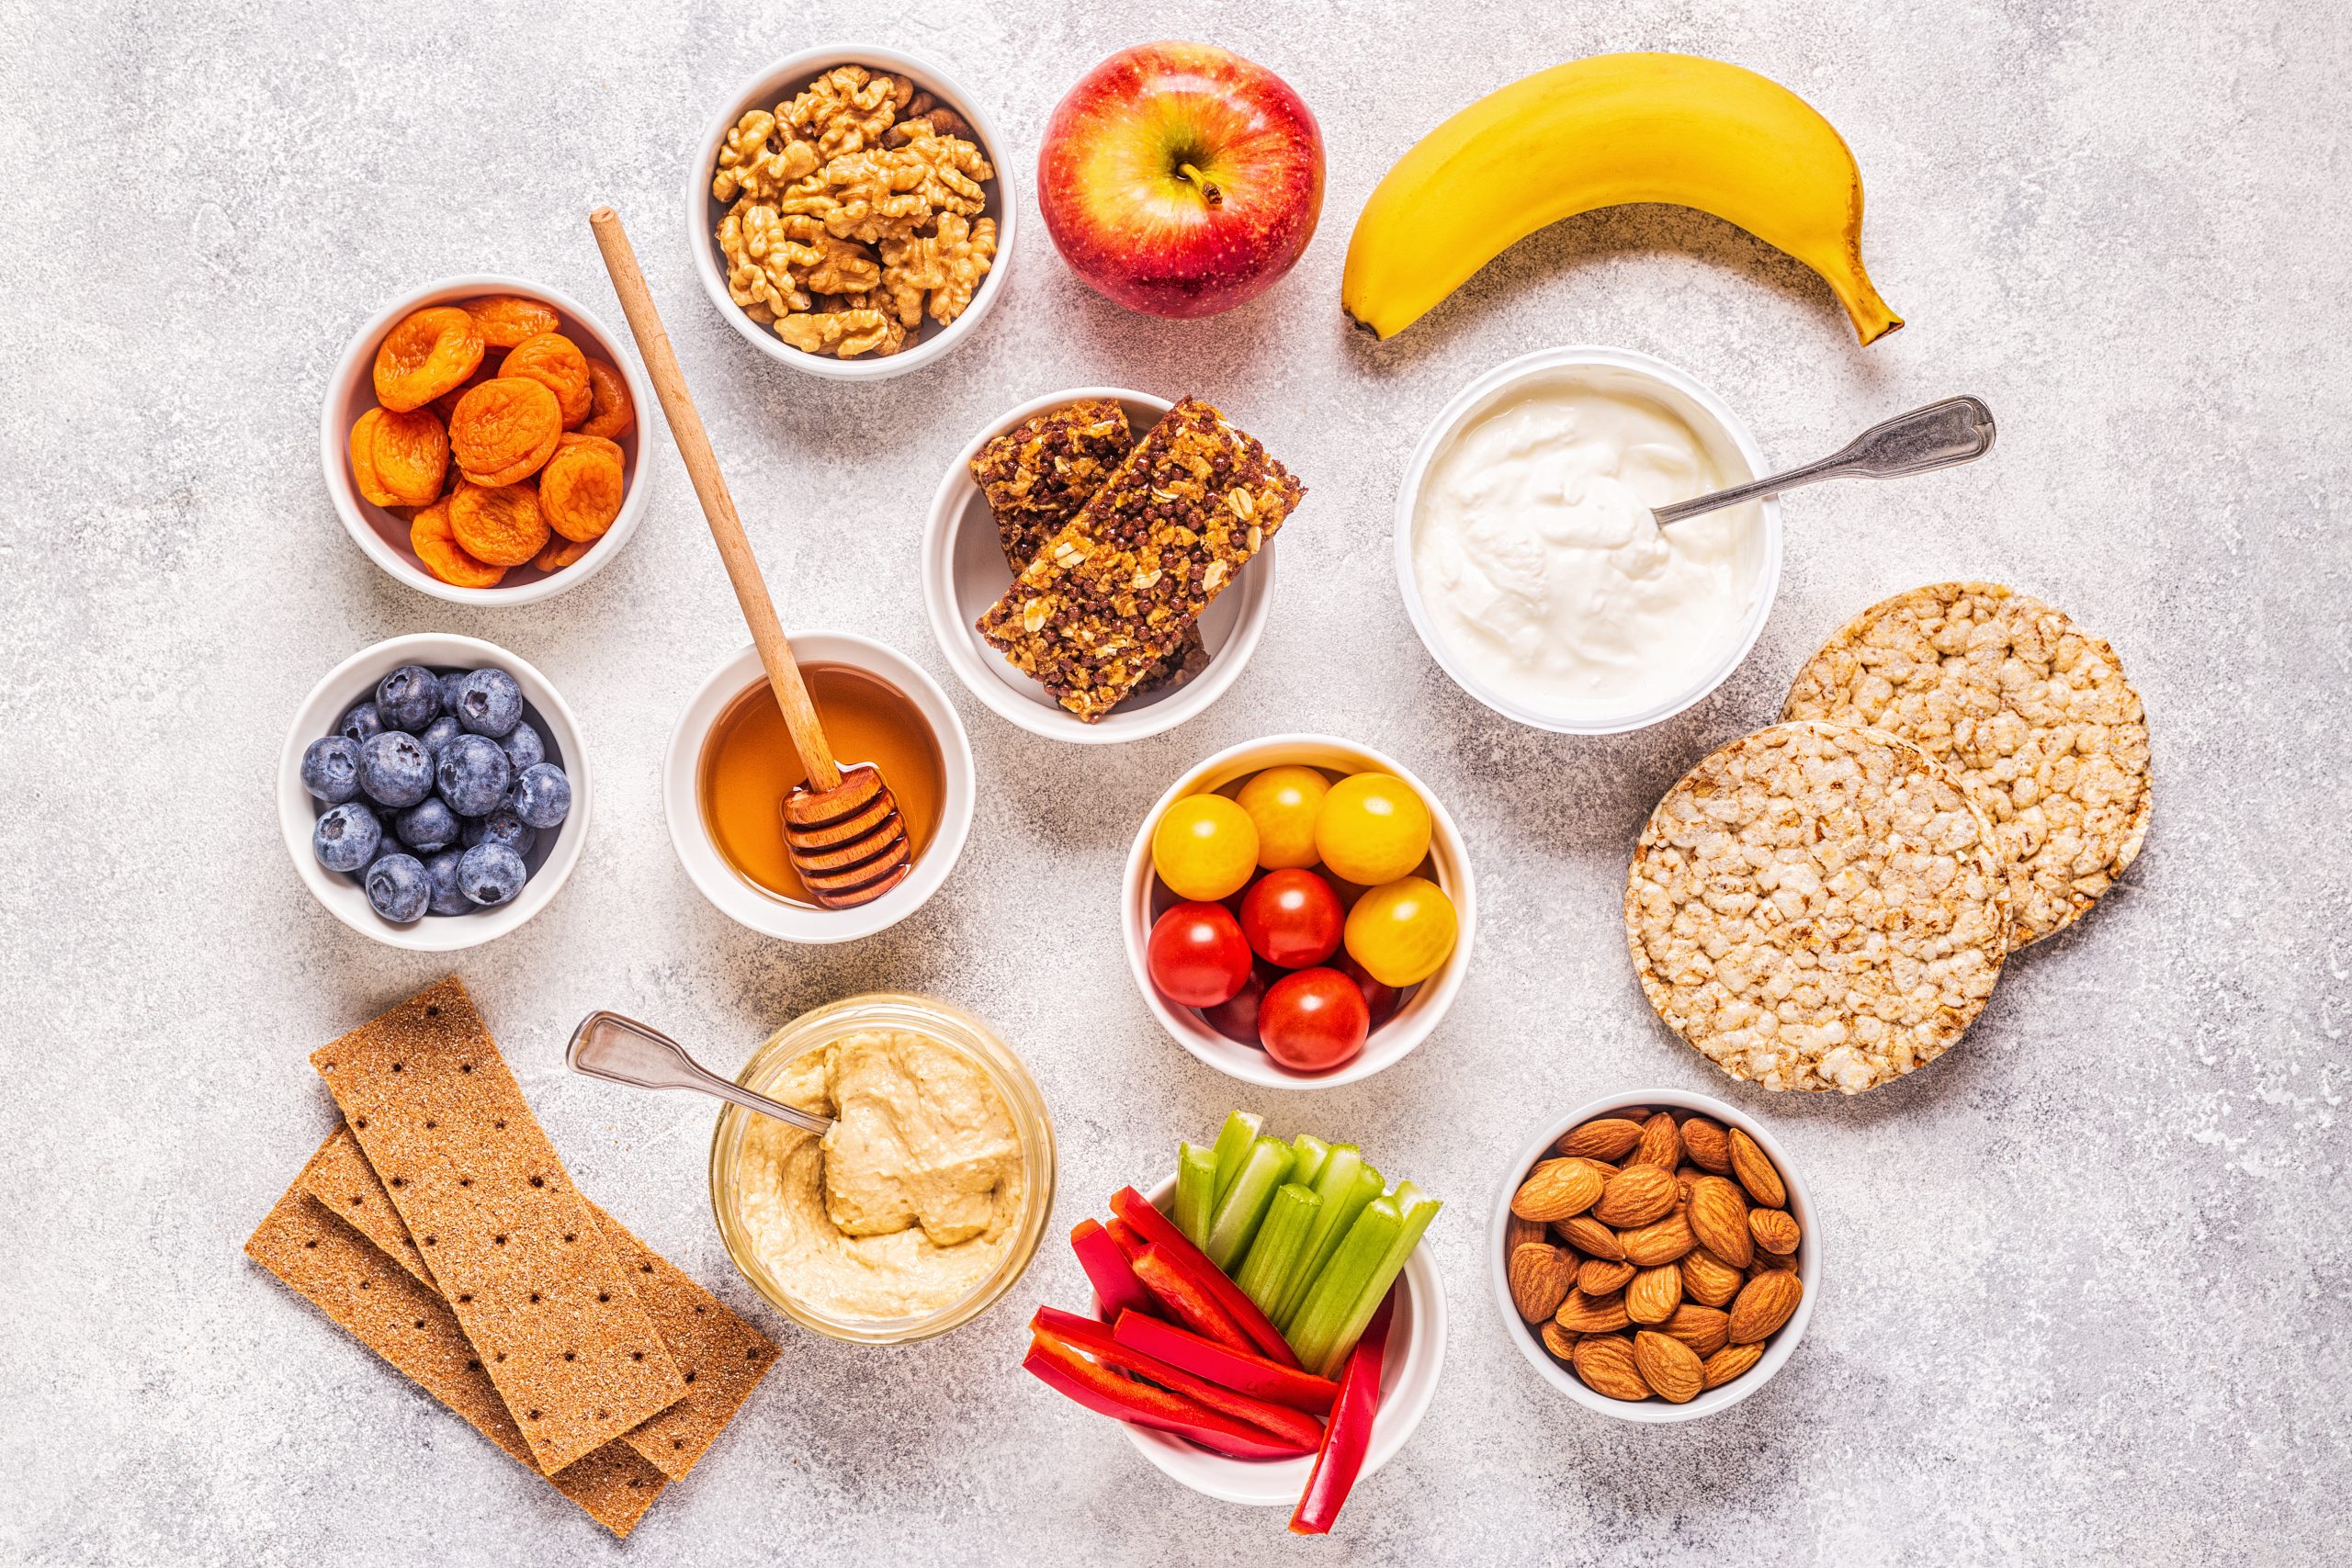 Healthy Snacking: Tasty Alternatives to Fast Food